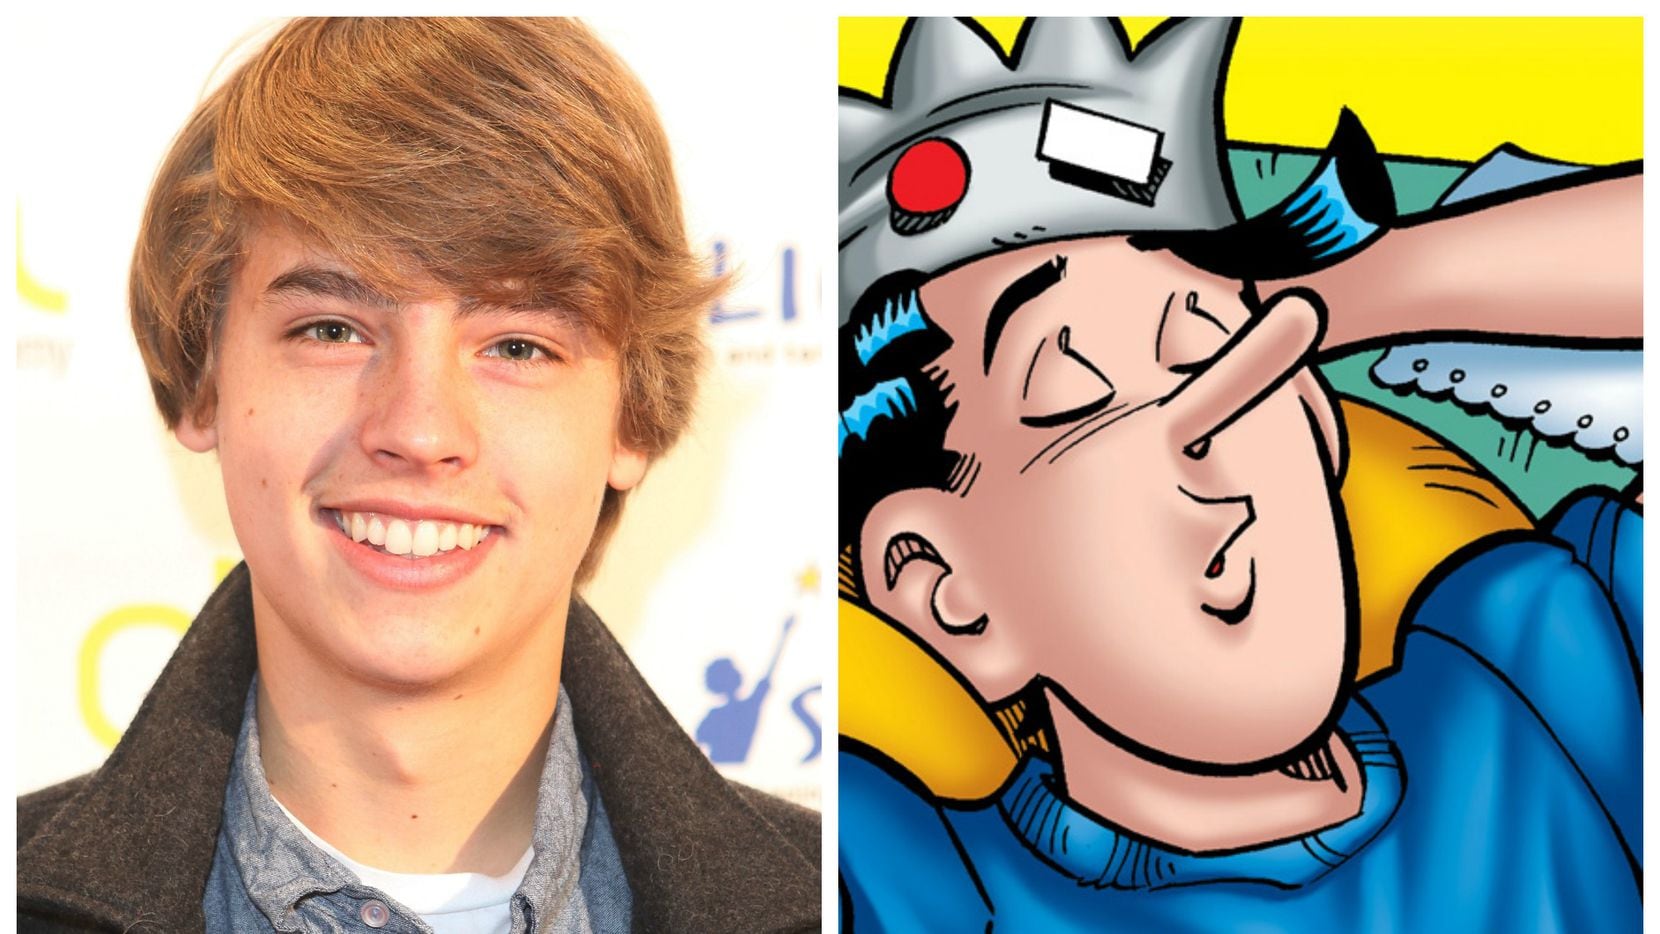 The Cw Has Cast Betty And Jughead For Its Archie Comics Series Riverdale